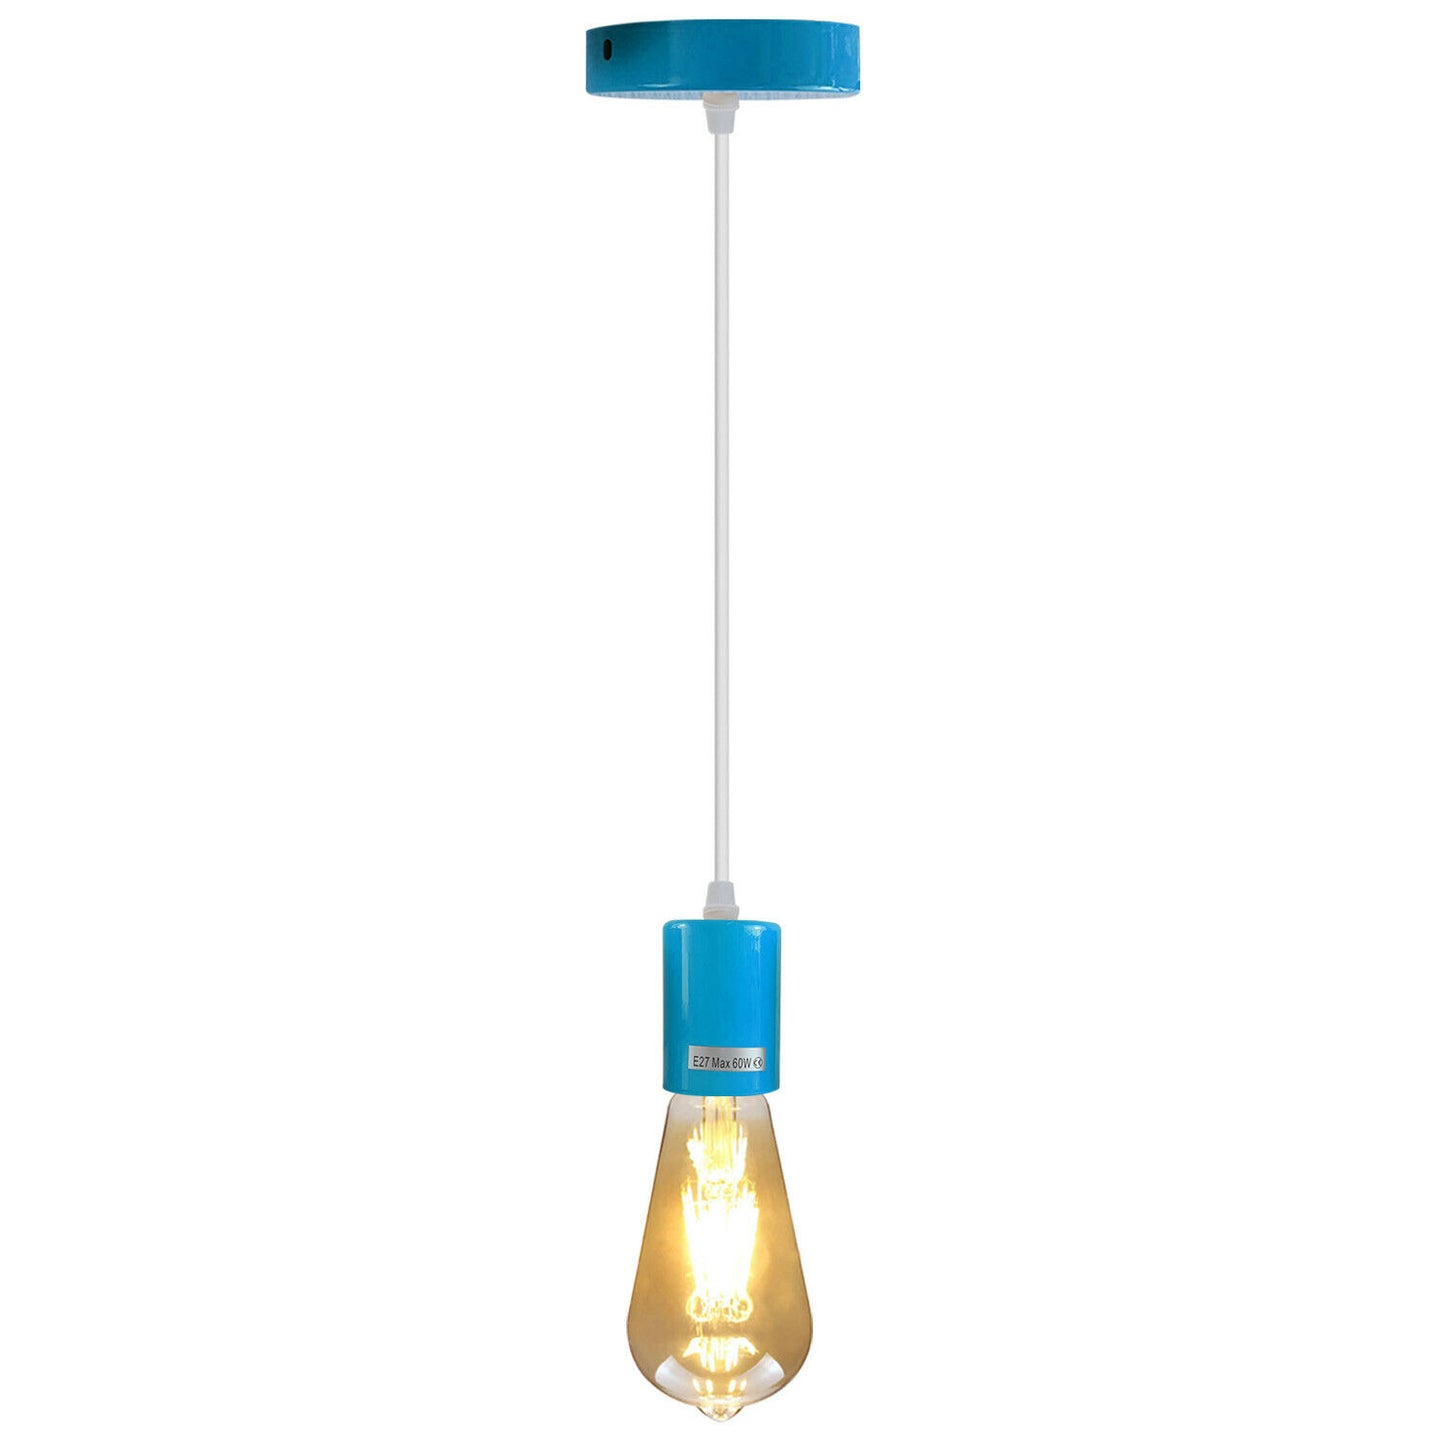 Blue Industrial Metal Ceiling Fitting E27 Pendant Lamp Holders